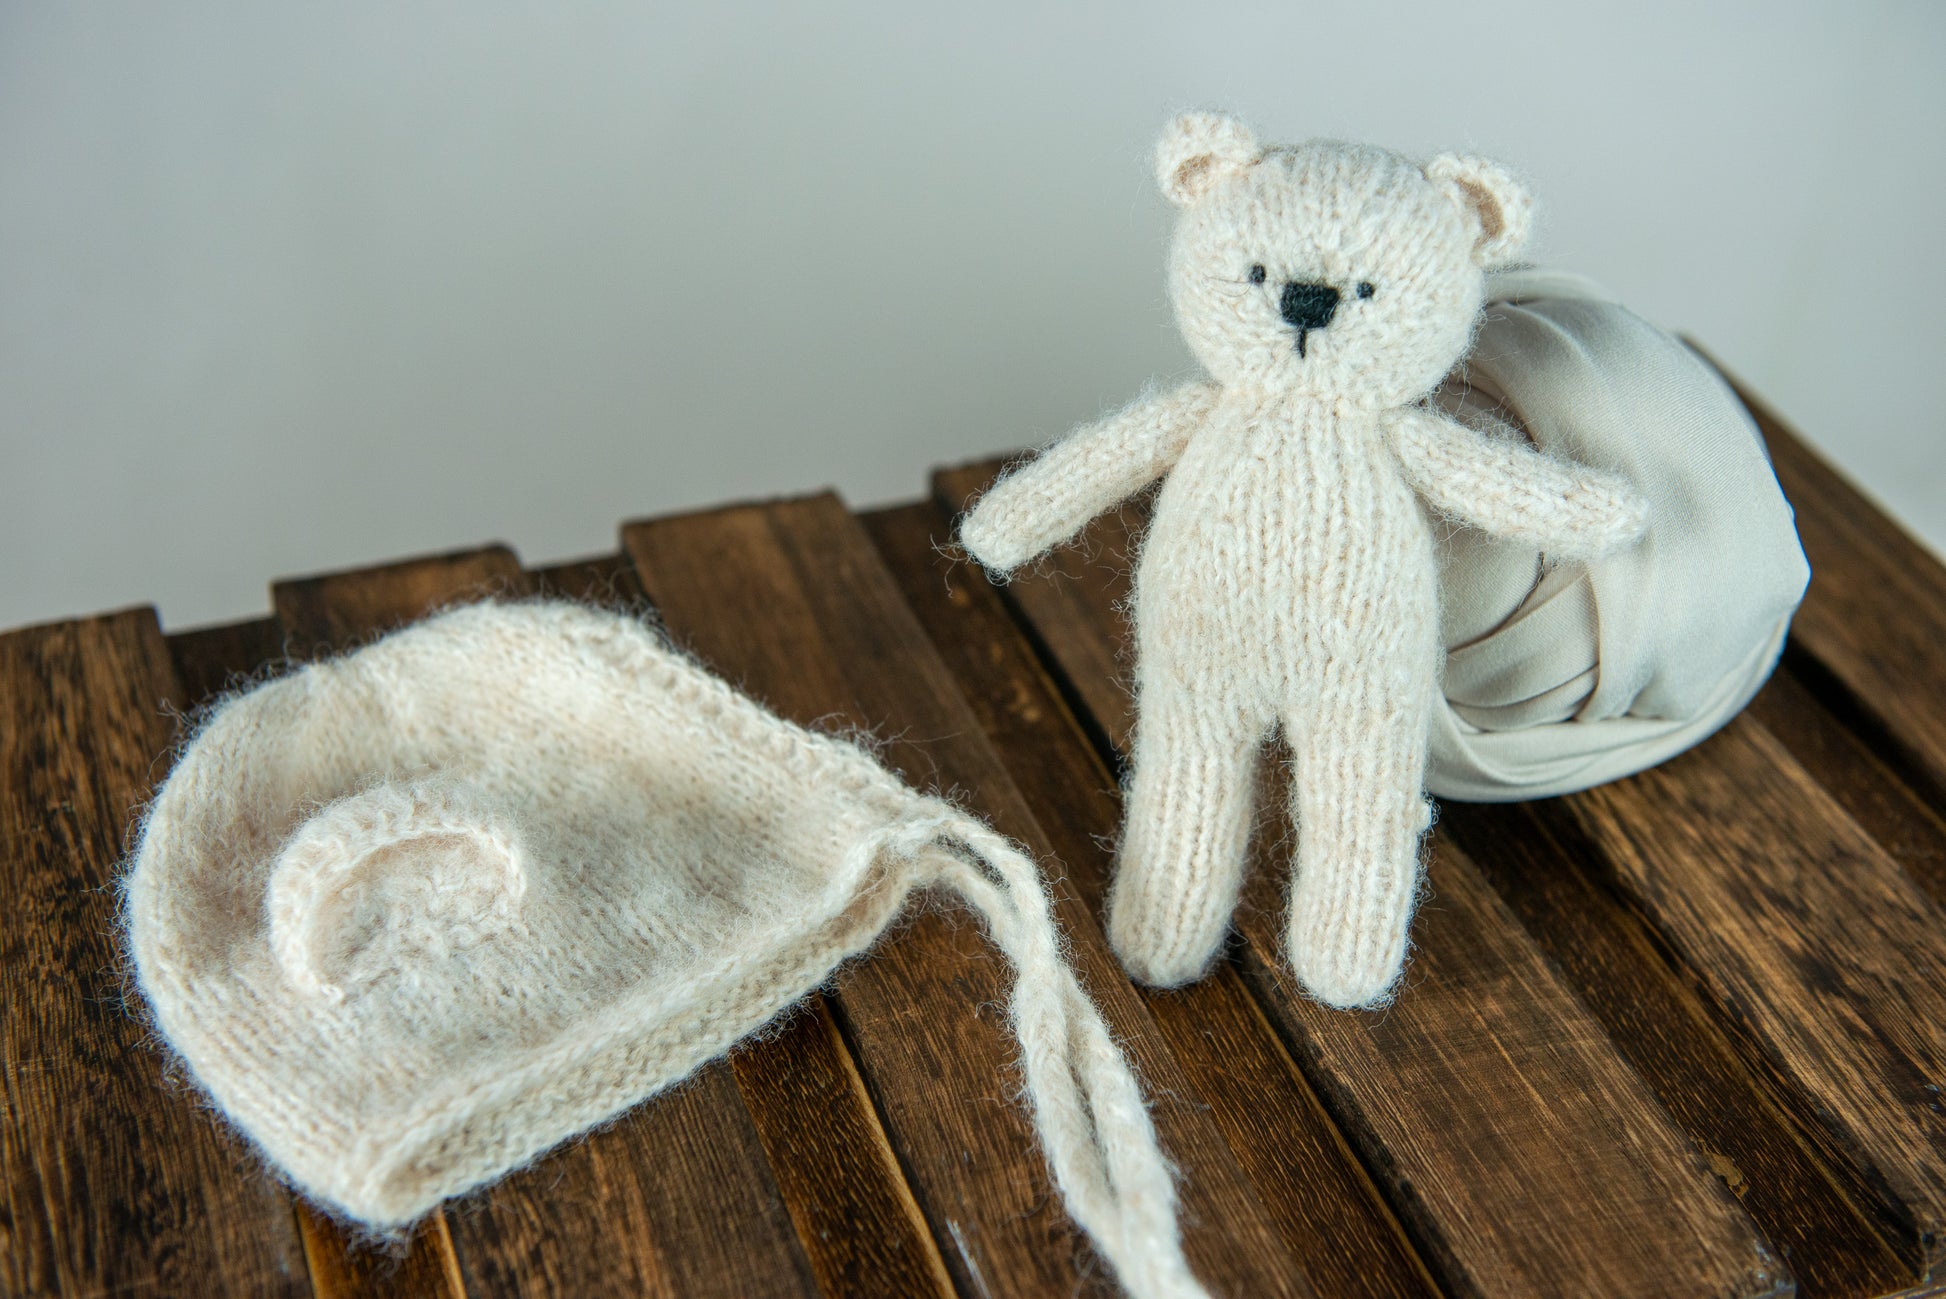 Knit teddy bear and matching hat beside cream swaddle; newborn photography prop.